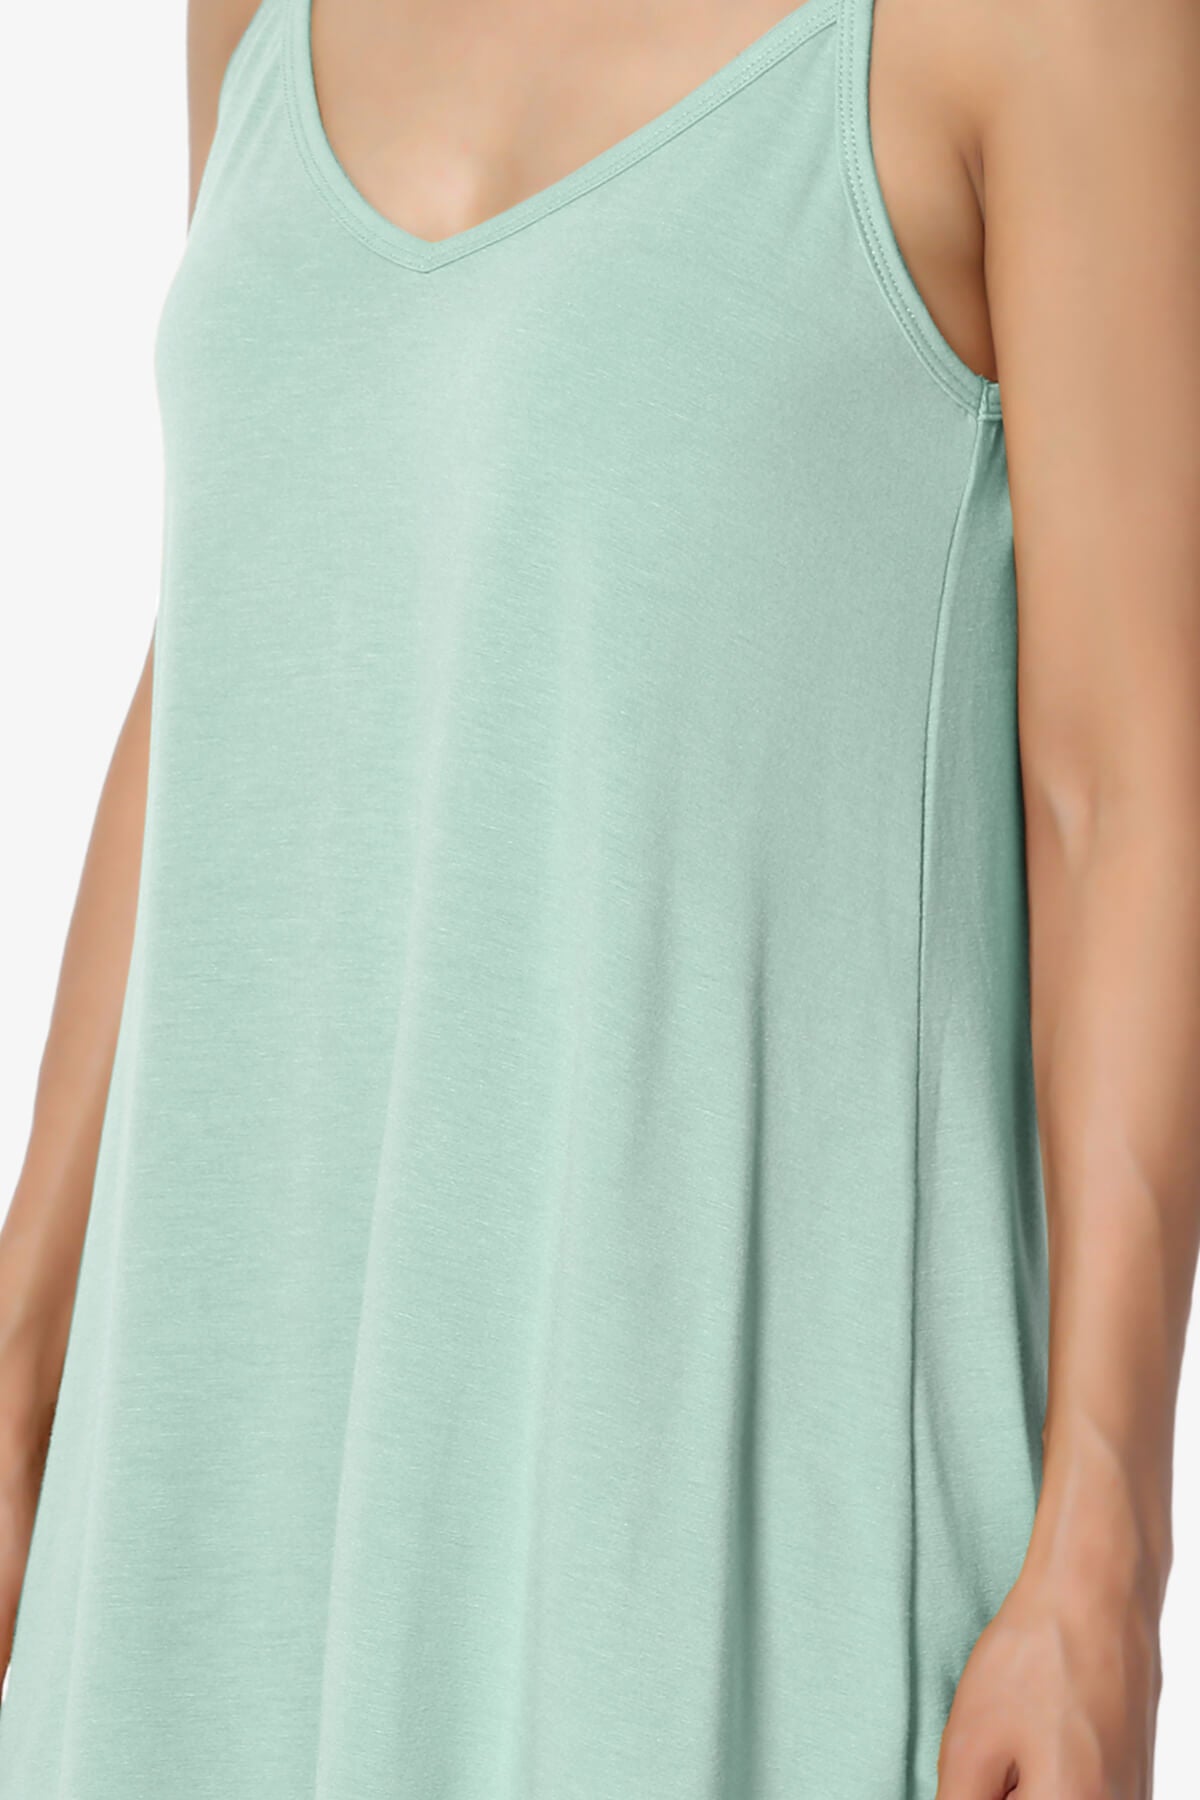 Chelsea Scoop & V Neck Flared Camisole Top LIGHT GREEN_5